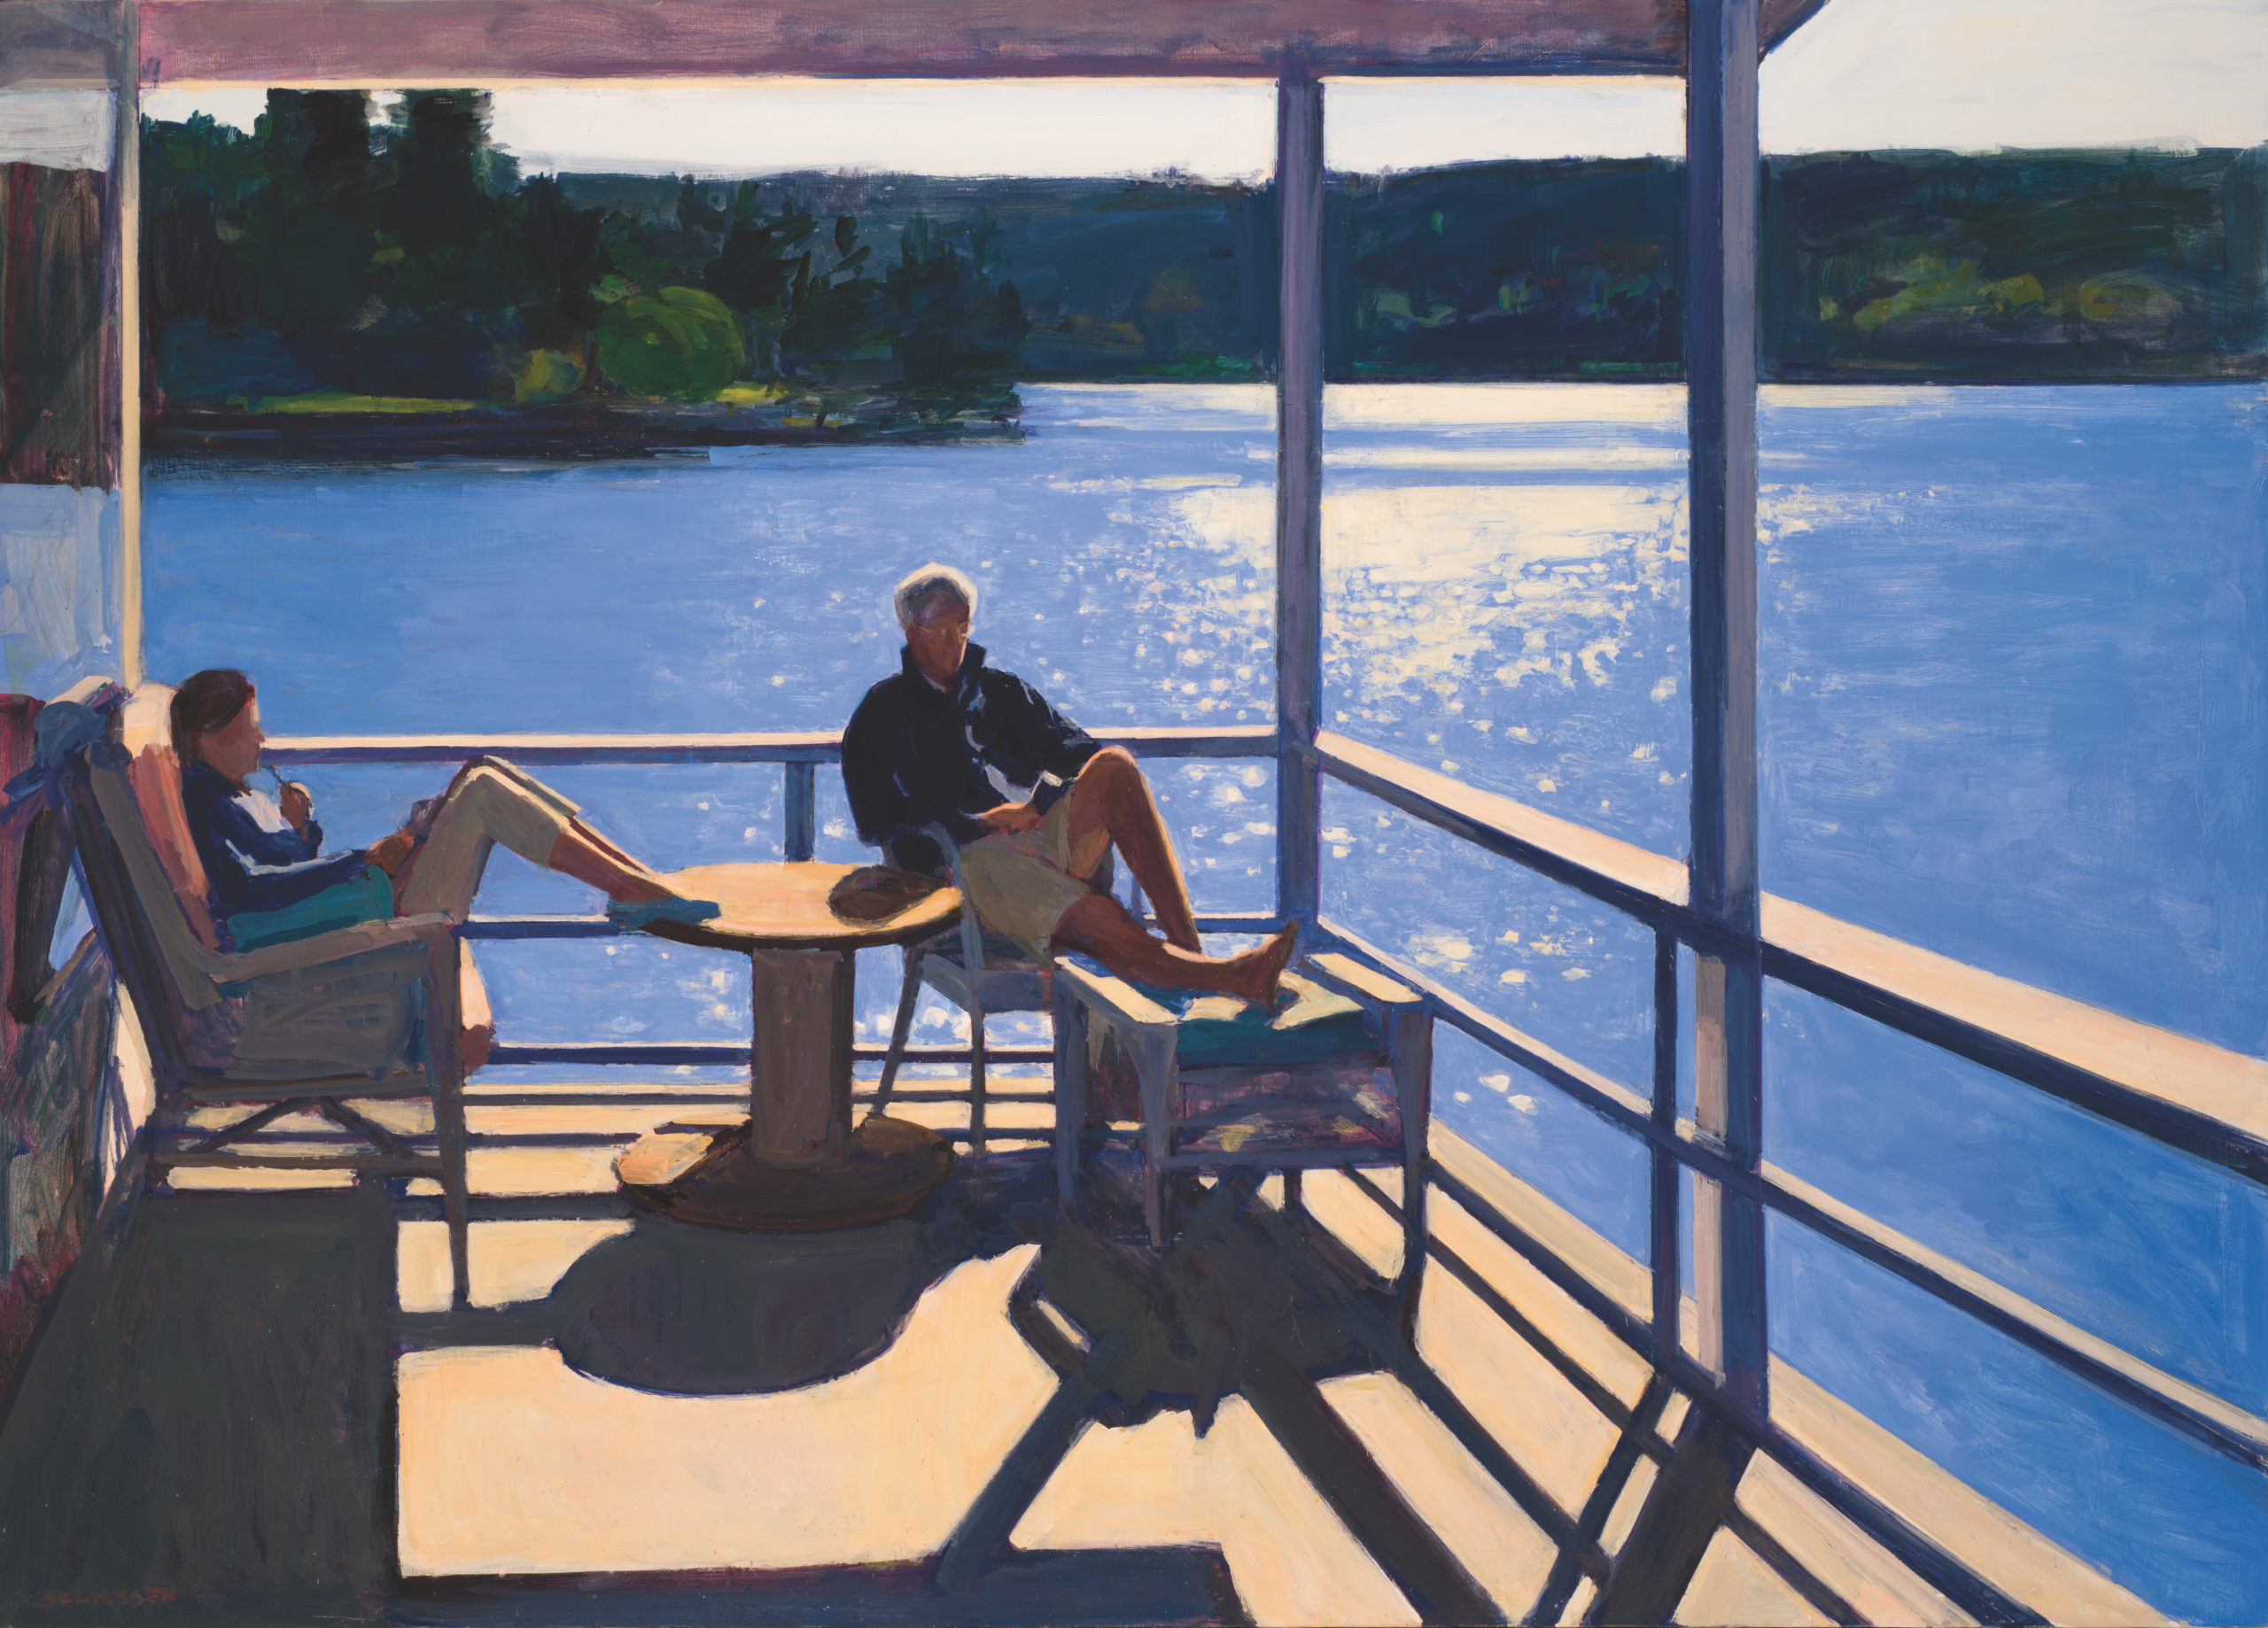 Kurt Solmssen (Vaughn), Labor Day, 2012. Oil on linen, 50”h x 70”w. Collection of Cynthia Sears, Promised Gift to BIMA.